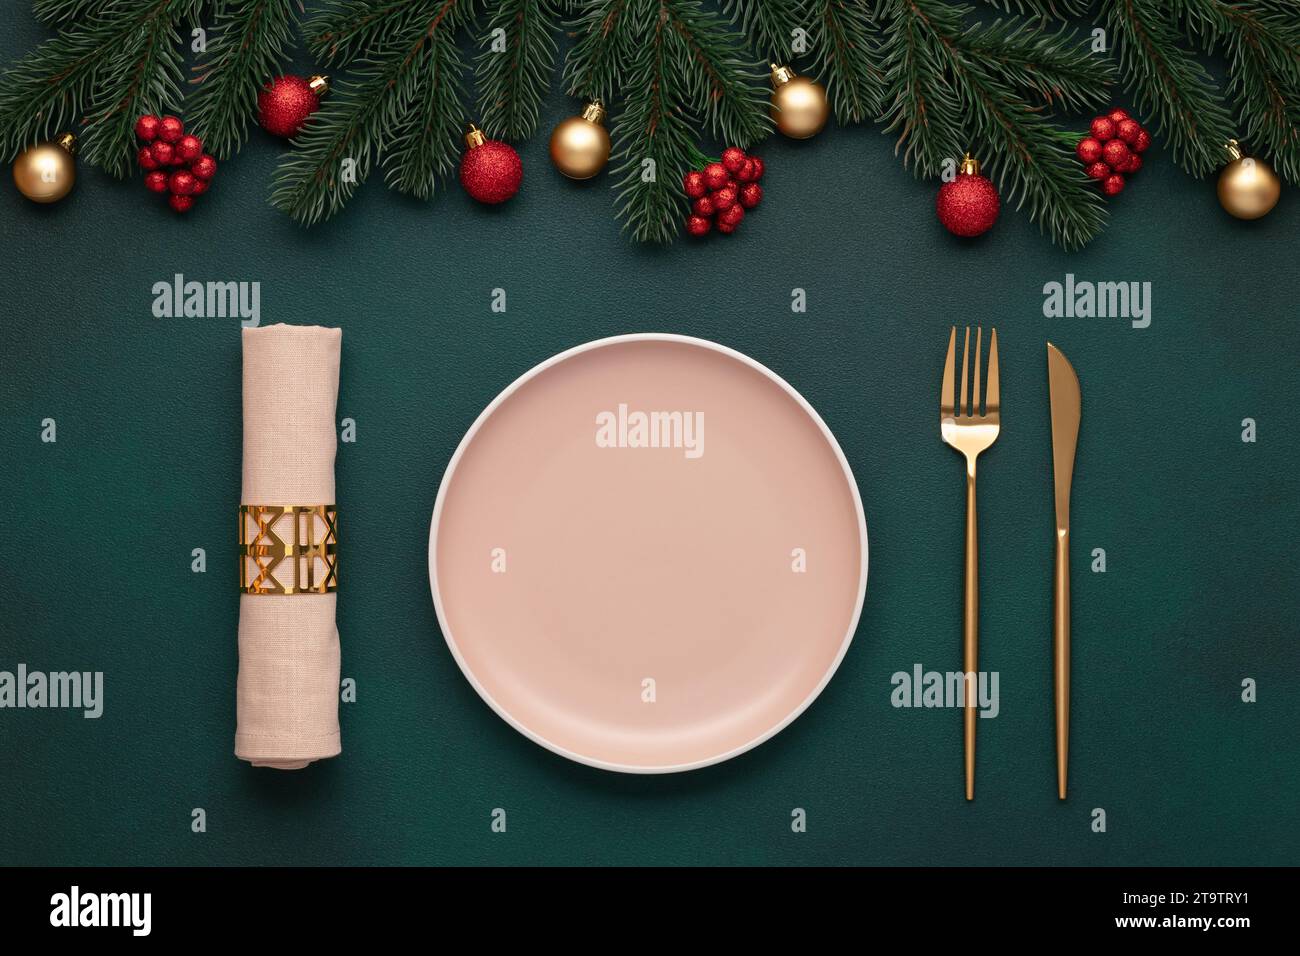 Christmas table with decorations. Empty plate, fork, knife. Gold cutlery, dark green background. Top view. Celebration place setting, evergreen tree. Stock Photo